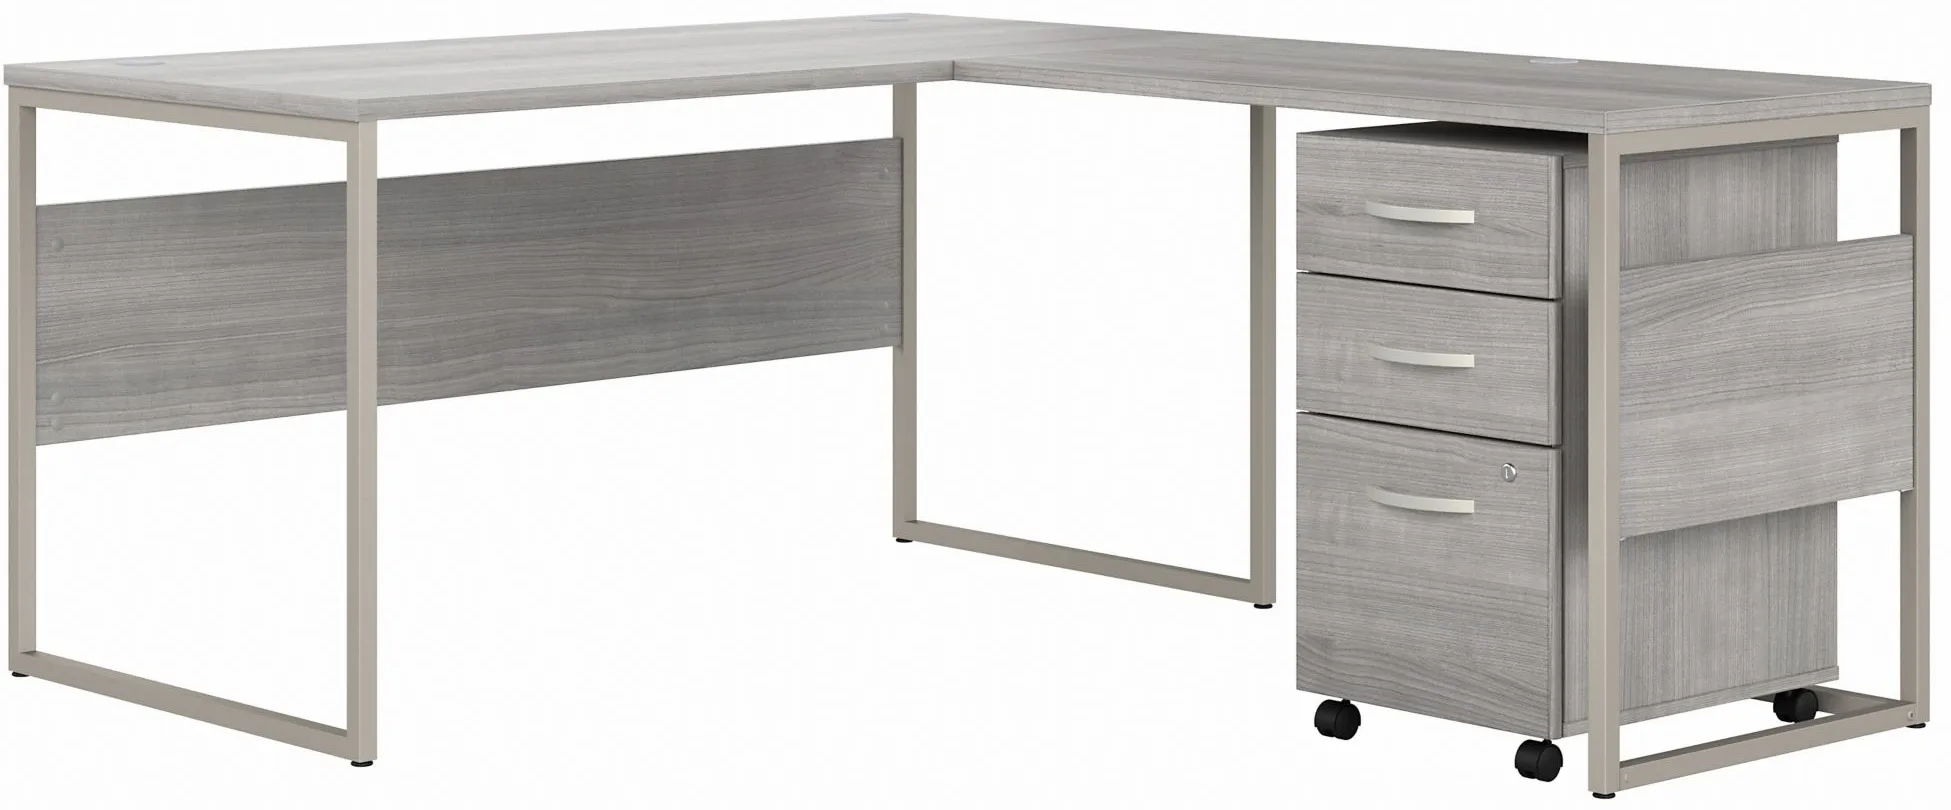 Steinbeck L-Shaped Writing Desk w/ File Cabinet in Platinum Gray by Bush Industries